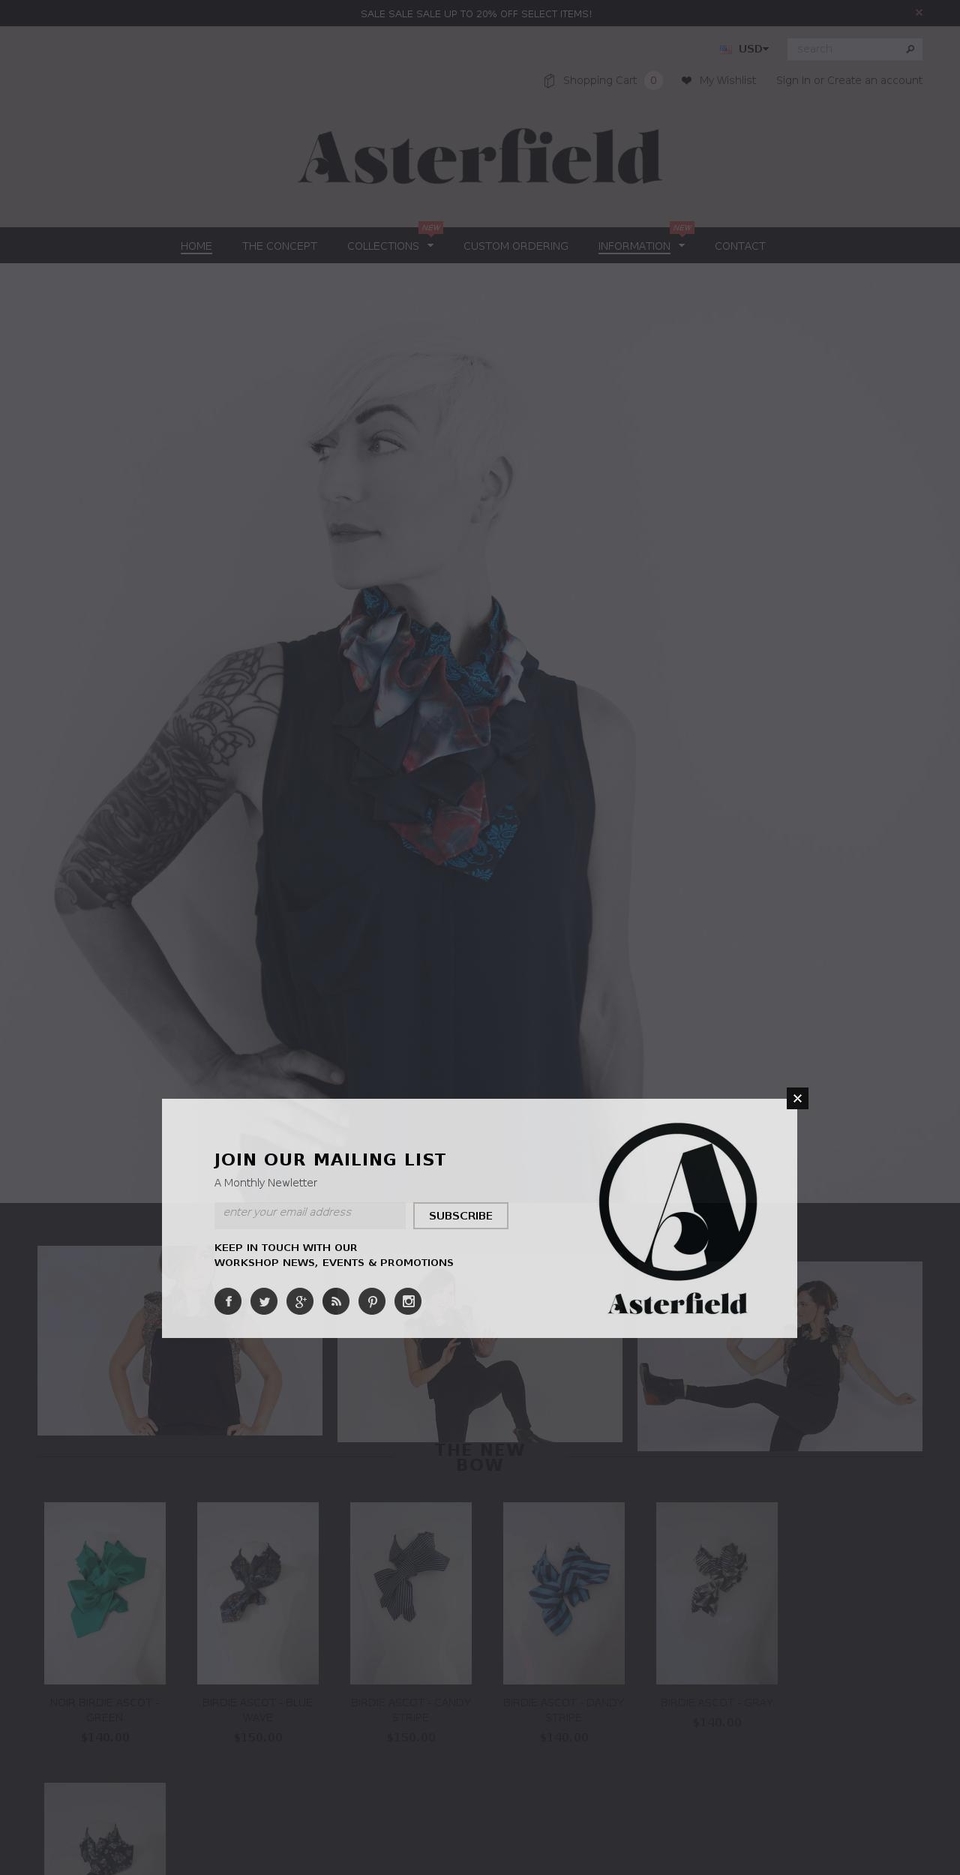 North Shopify theme site example lilianasterfield.com